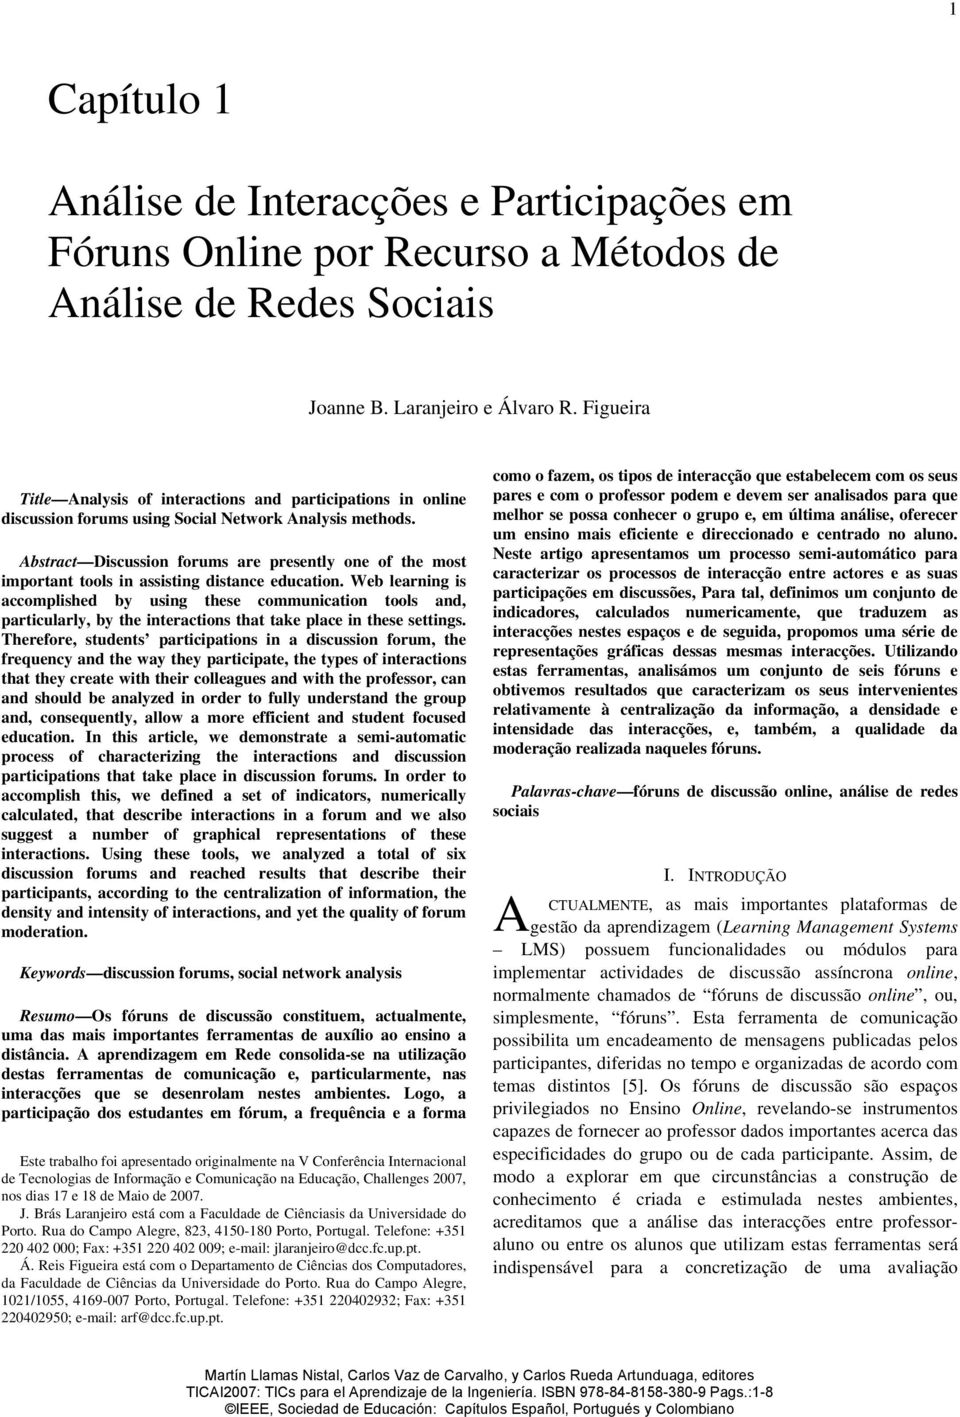 Joanne B. Laranjeiro e Álvaro R. Figueira Title Analysis of interactions and participations in online discussion forums using Social Network Analysis methods.